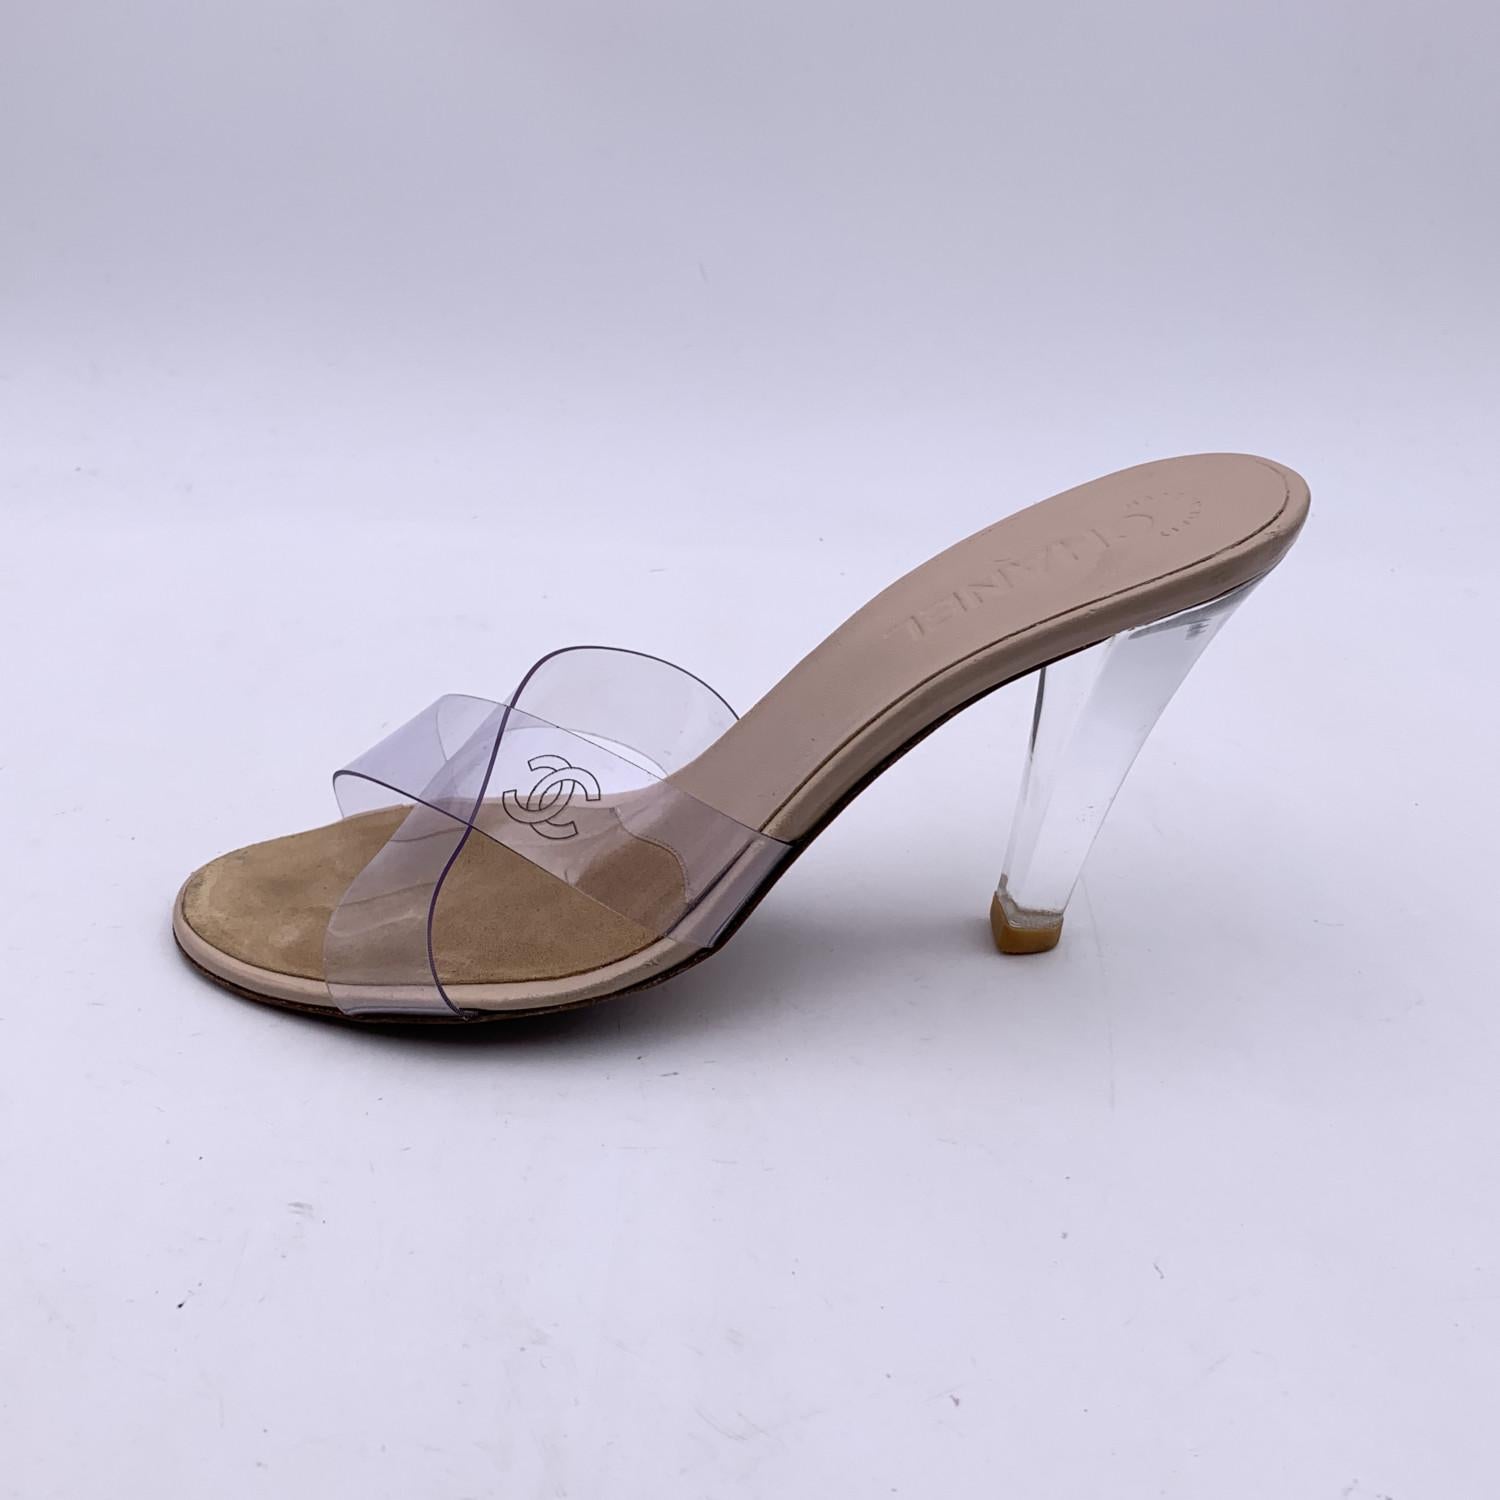 Beautiful Chanel mules sandals. They feature clear PVC criss cross straps with CC logo, peep toe, slip on design and clear plexiglass heels. Leather insole and outsole. Heels Height: 4.5 inches - 11.5 cm. Made in Italy. Size EU 38.5 (The size shown